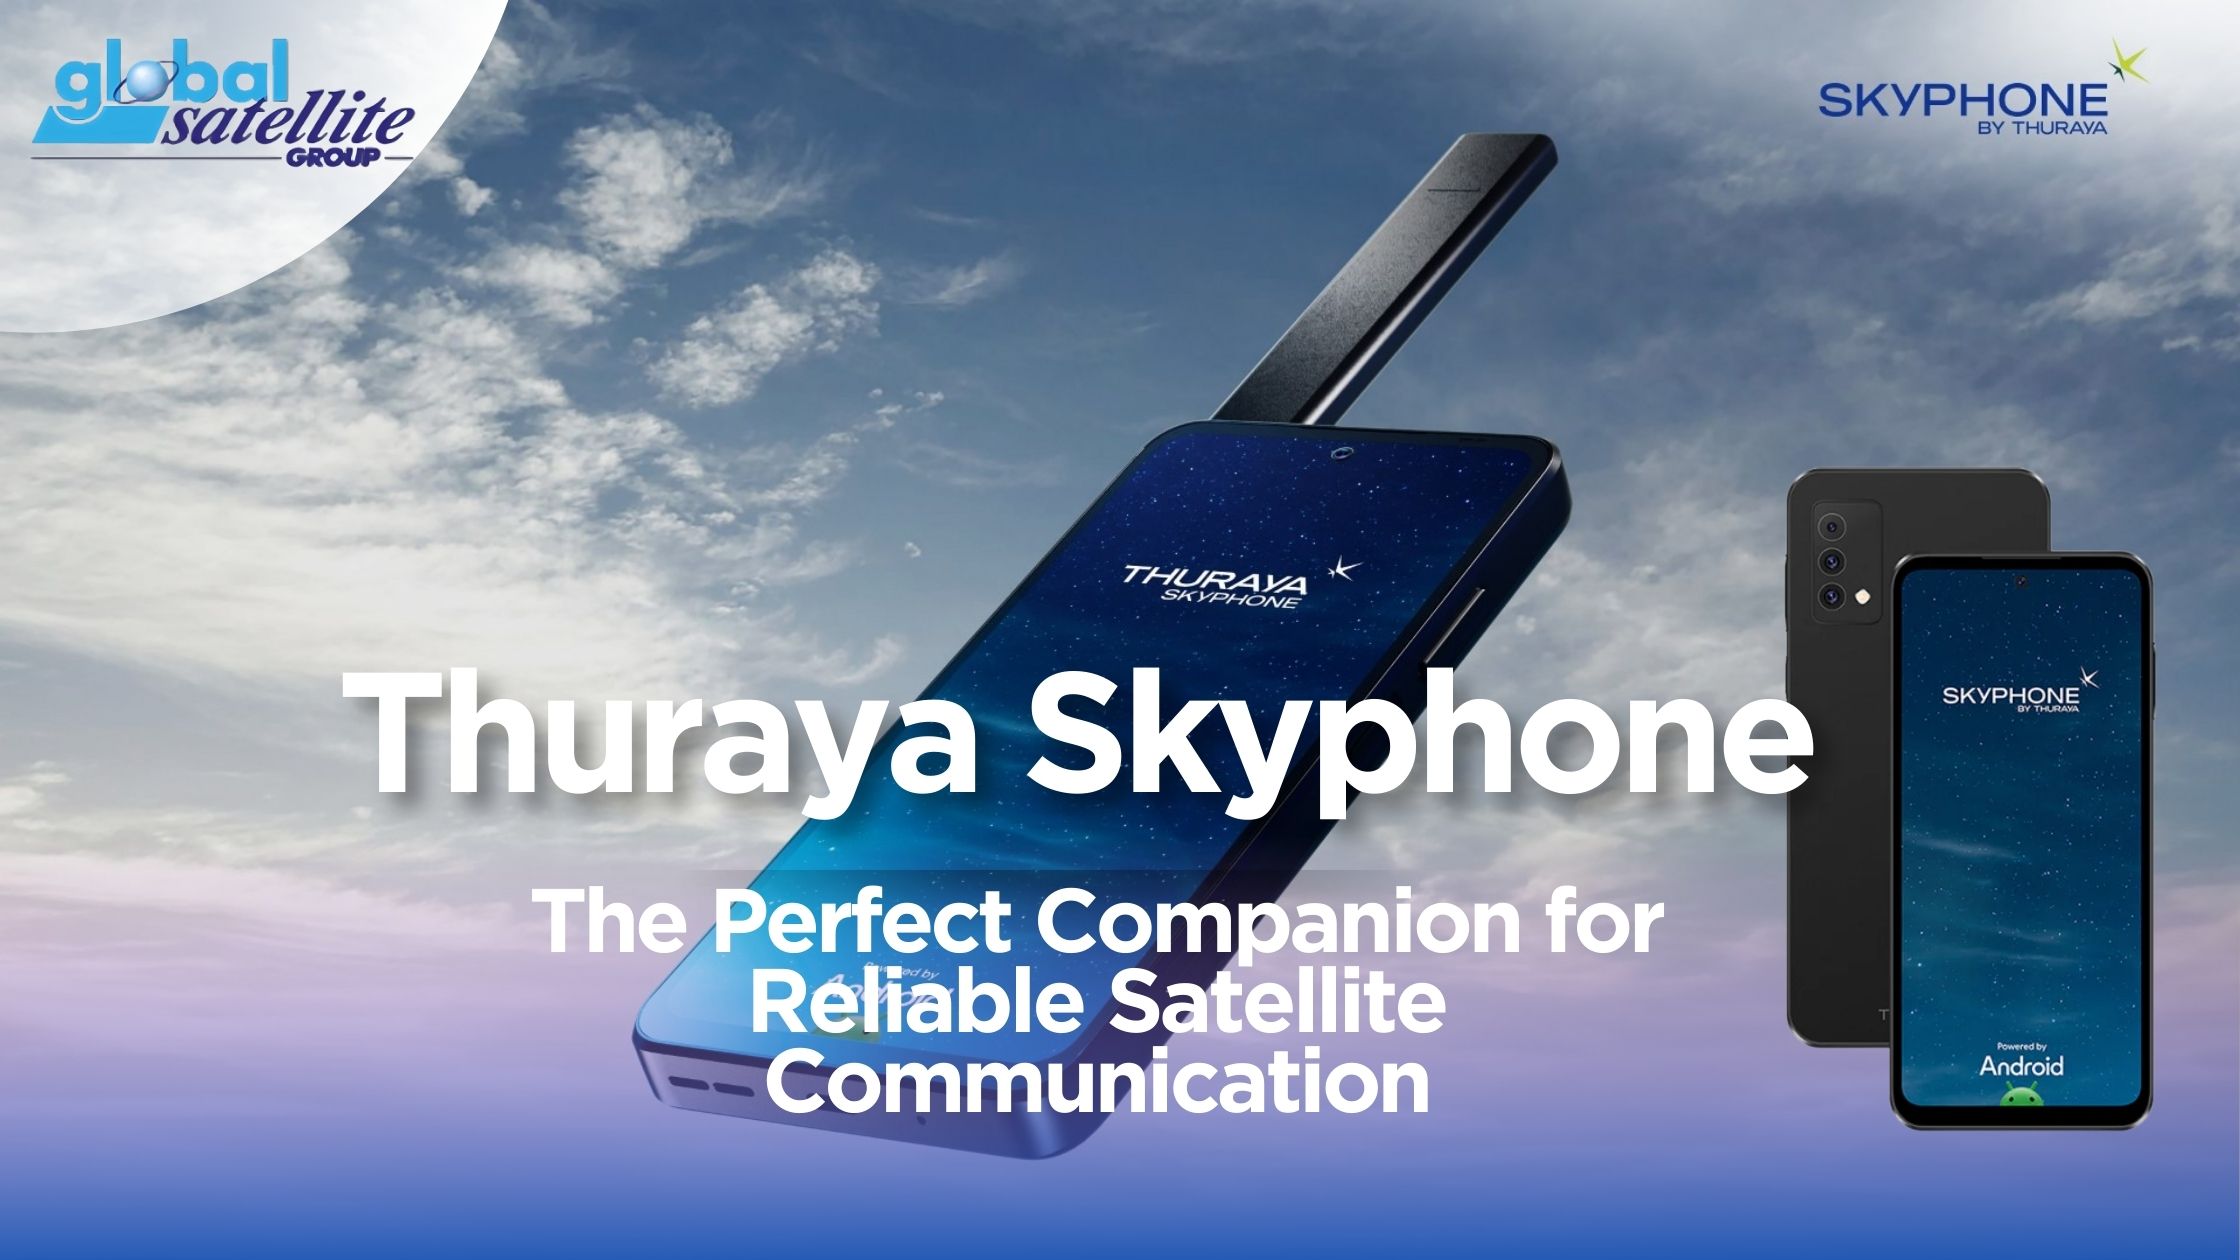 Thuraya Skyphone: The Perfect Companion for Reliable Satellite Communication